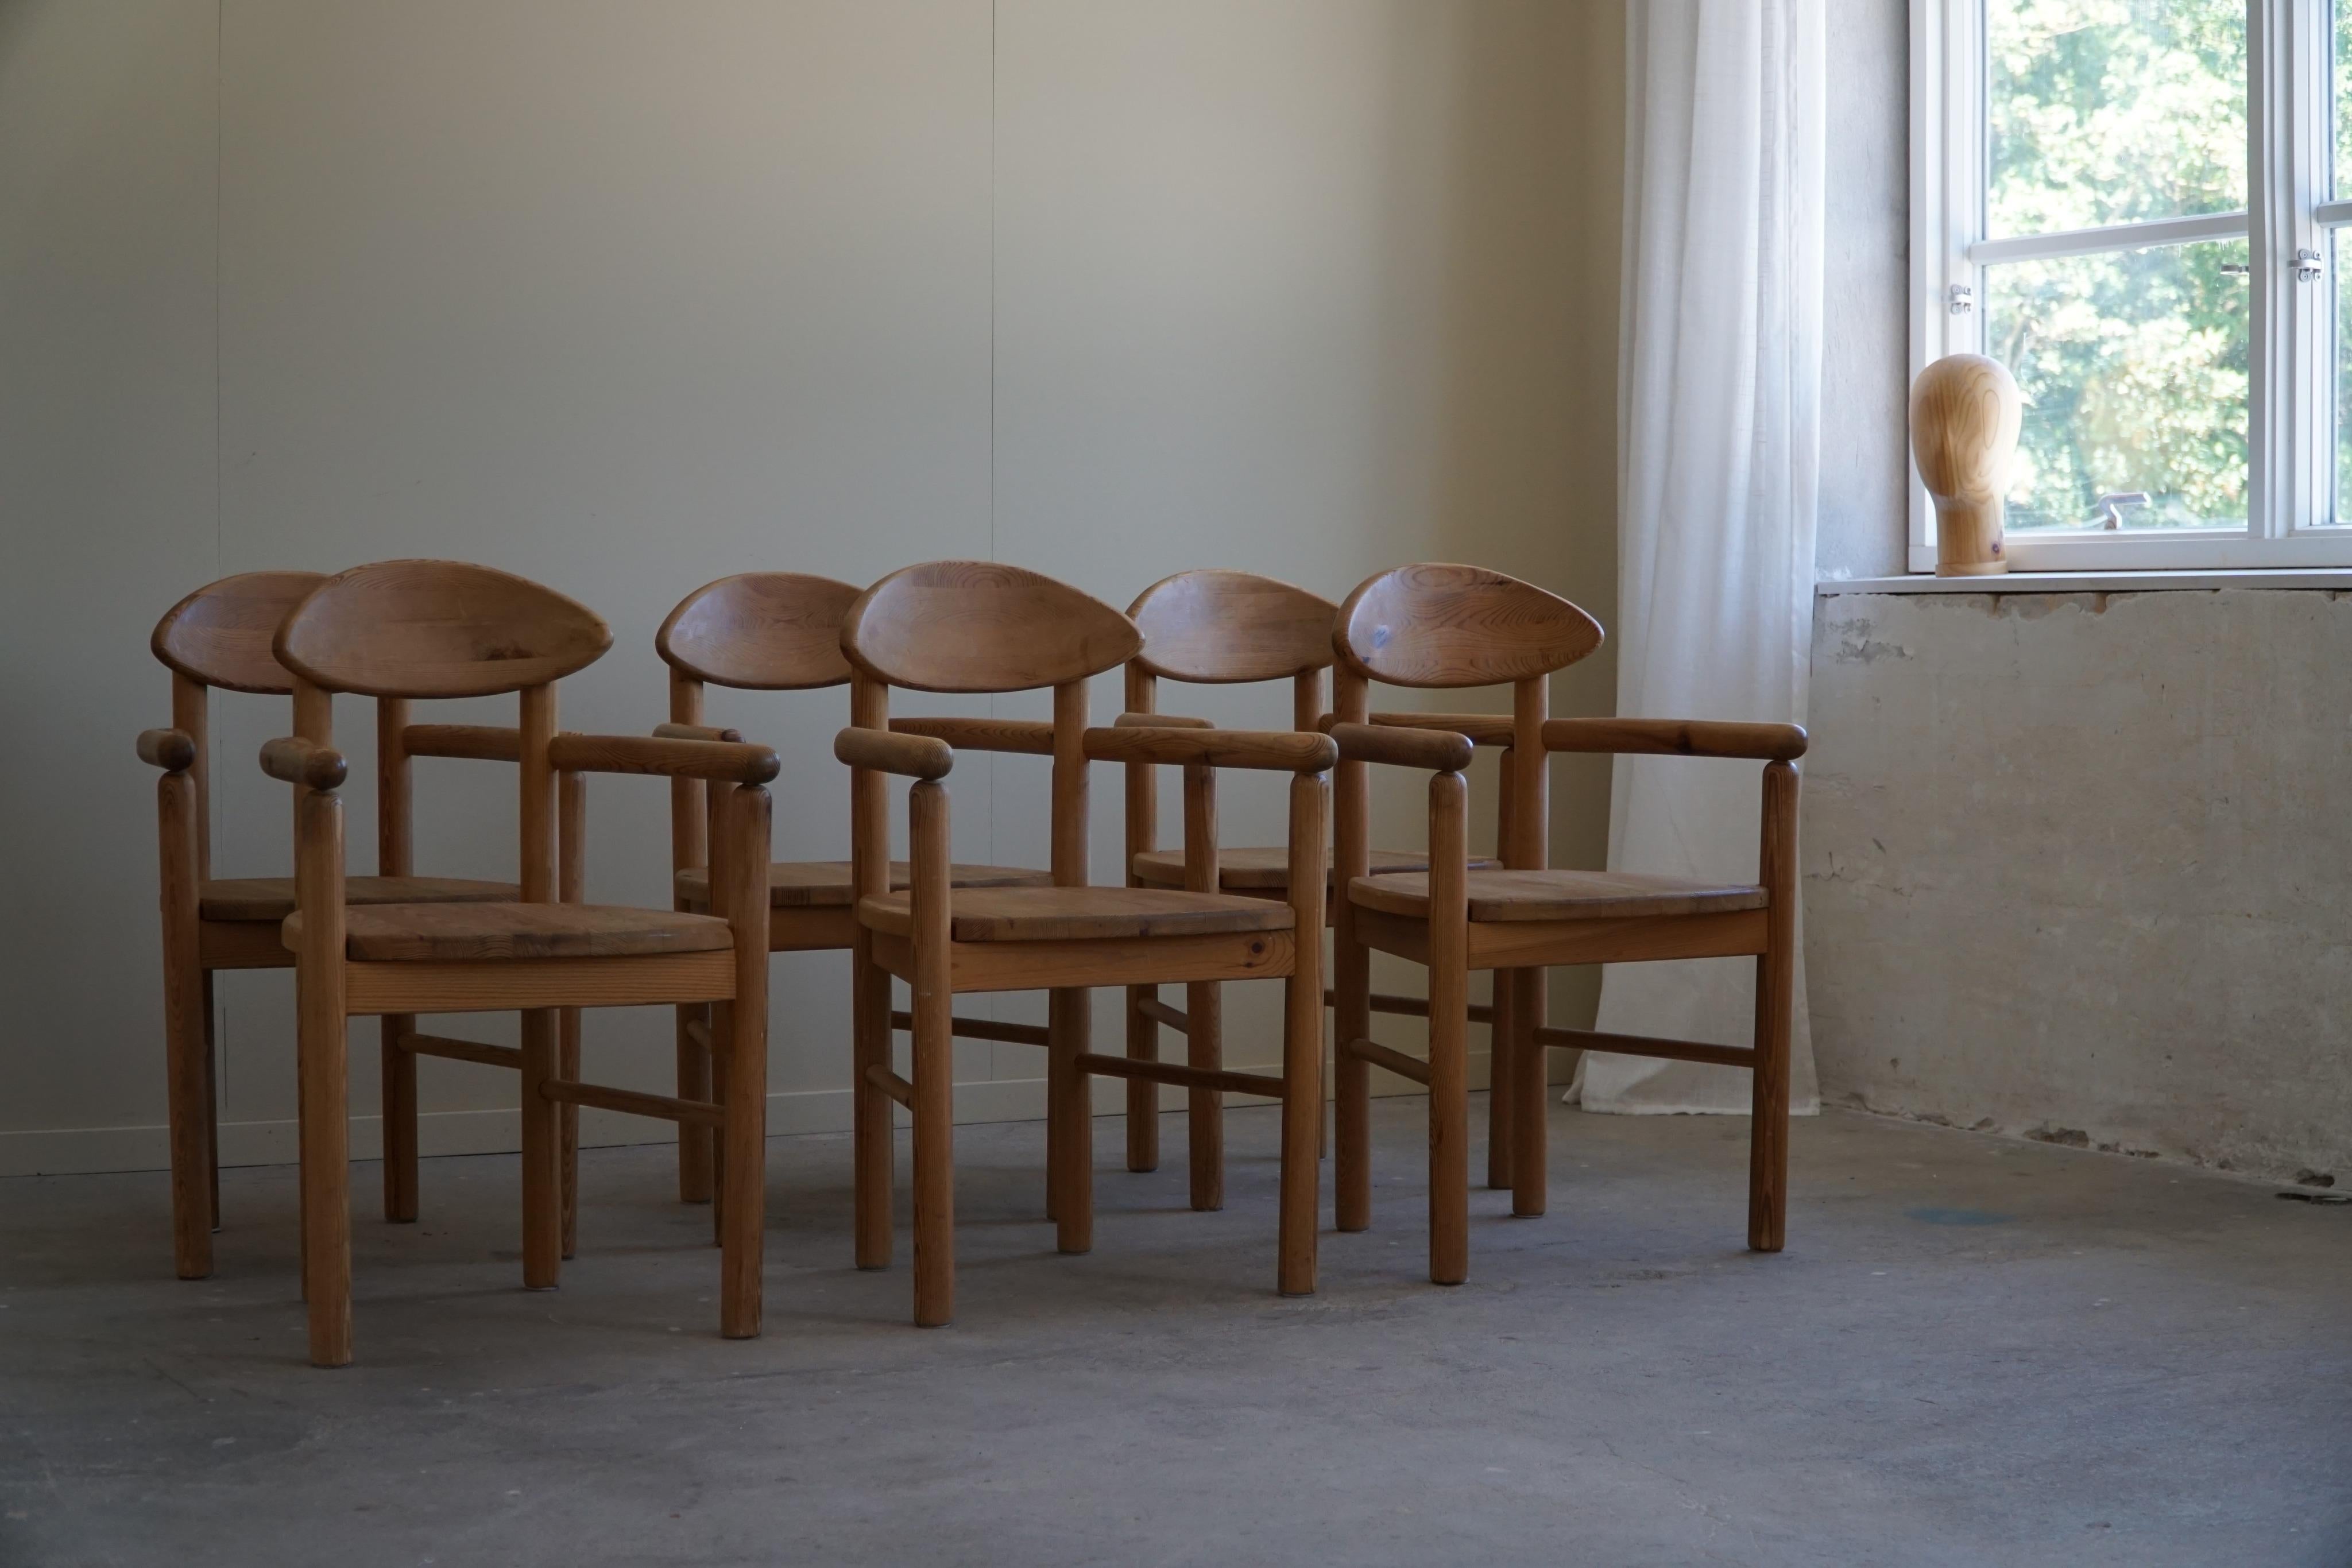 Set of 6 Dining Chairs in Solid Pine, Rainer Daumiller, Danish Modern, 1970s For Sale 11